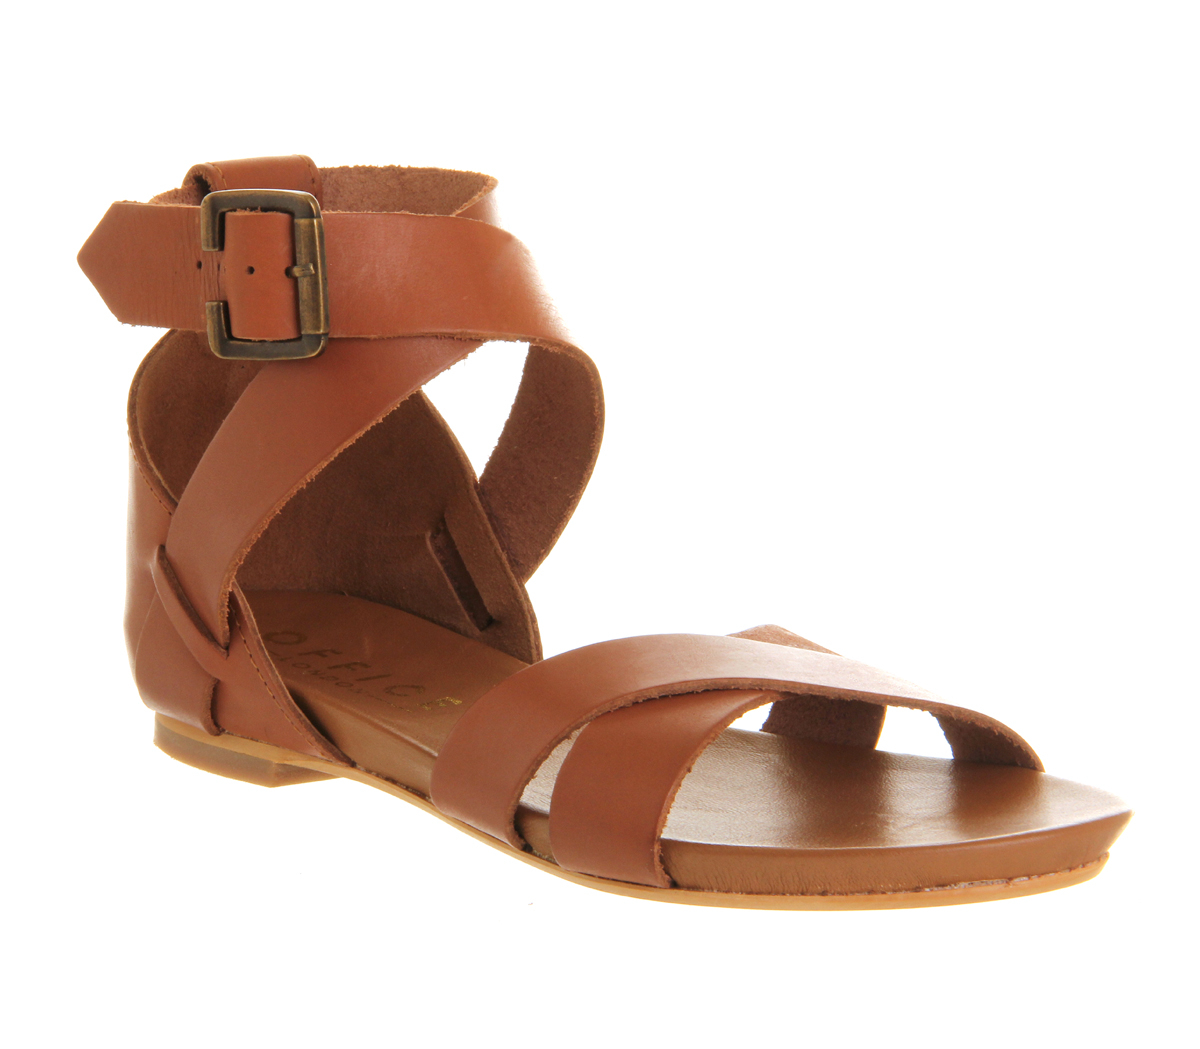 brown strappy flat sandals